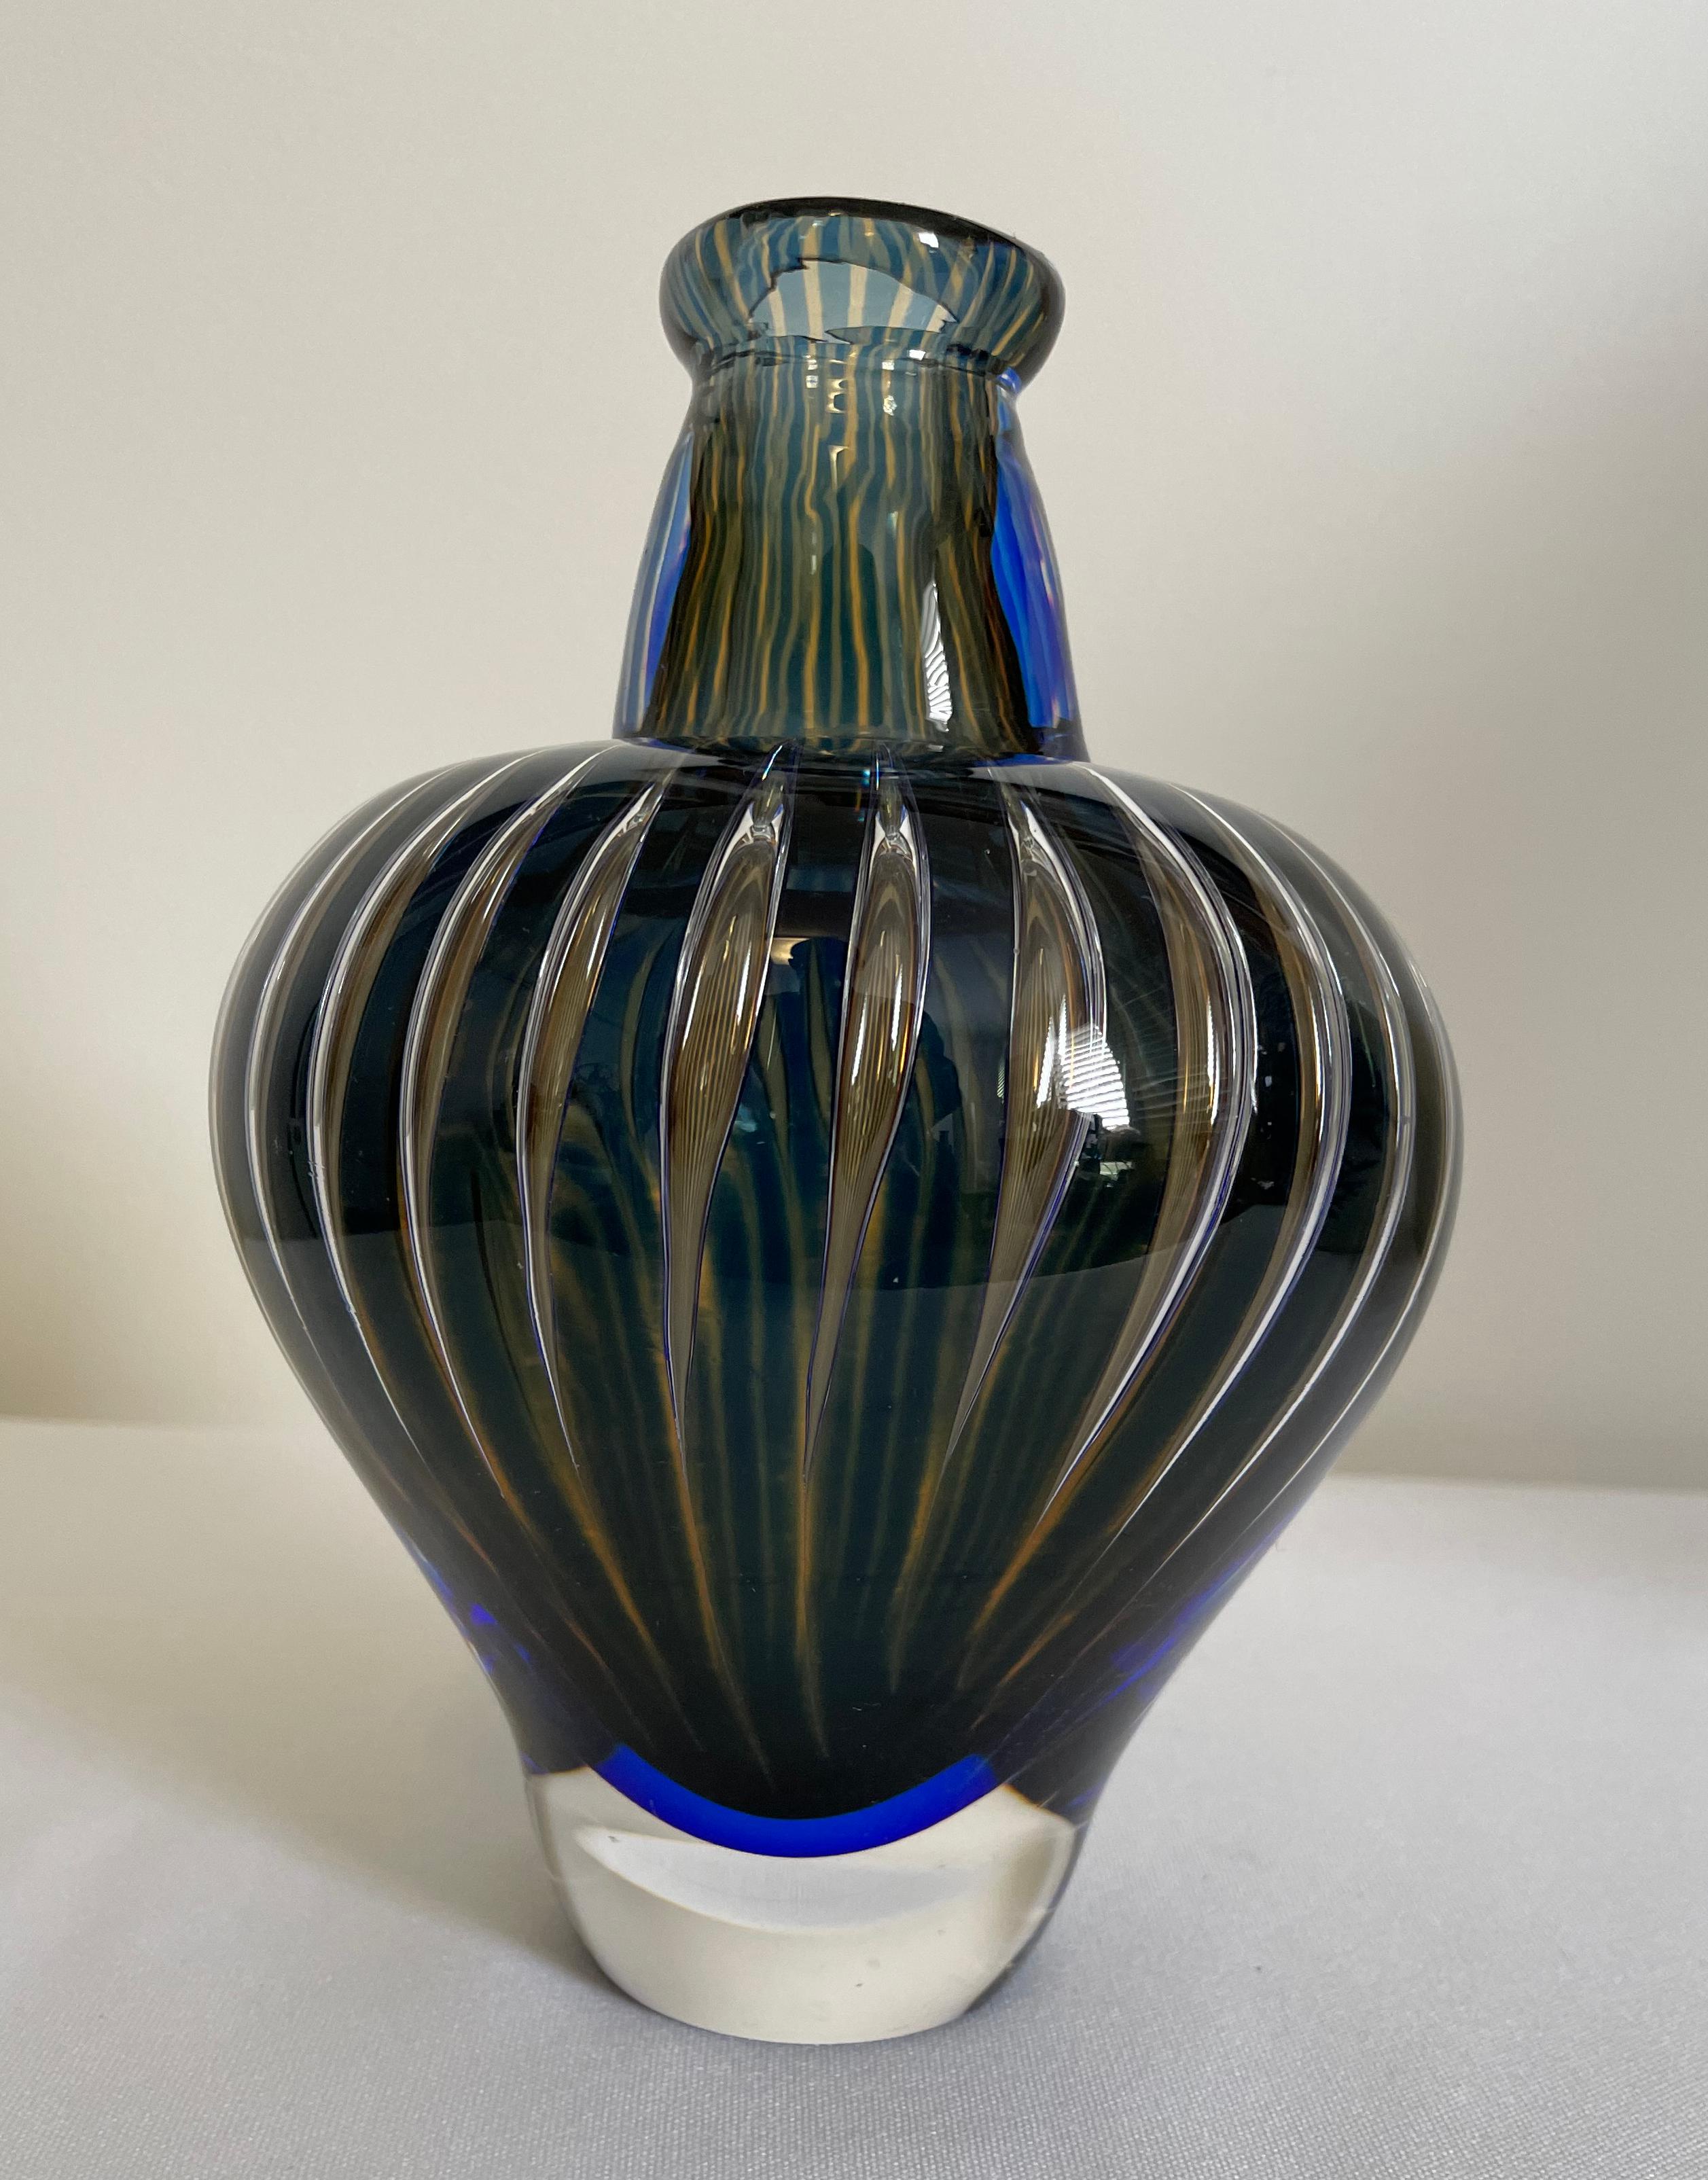 Orrefors Ariel Vase by Edvin Ohrstrom , Sweden, circa 1950.

A thick-walled bottle form with raised asymmetrical rim on a colorless body internally decorated with vertical blue stripes, inscribed on base Orrefors Ariel 3500 Edvin Ohrstrom

Edvin